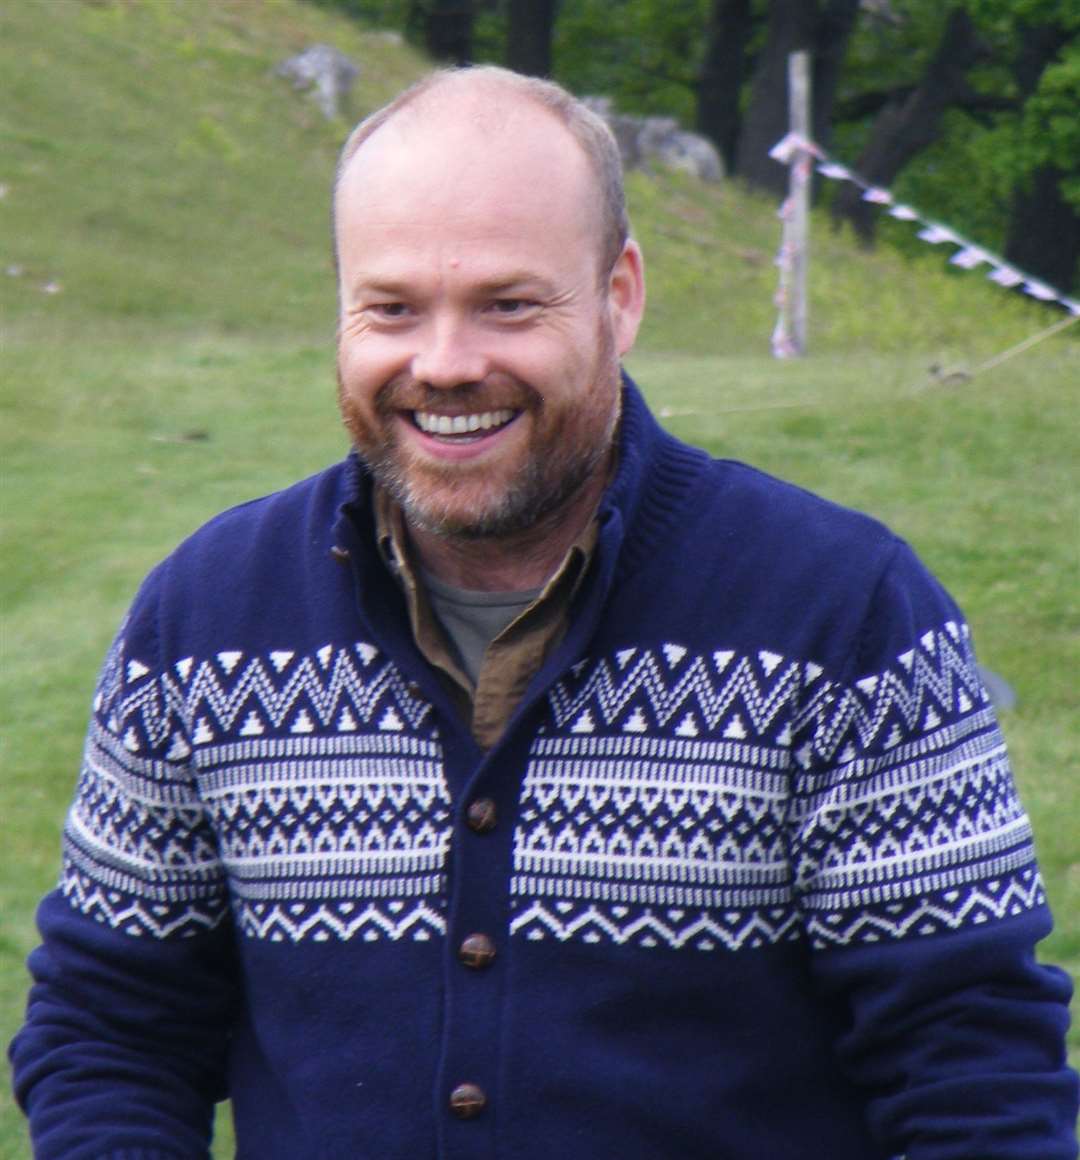 Anders Holch Povlsen is Scotland's largest private landowner.